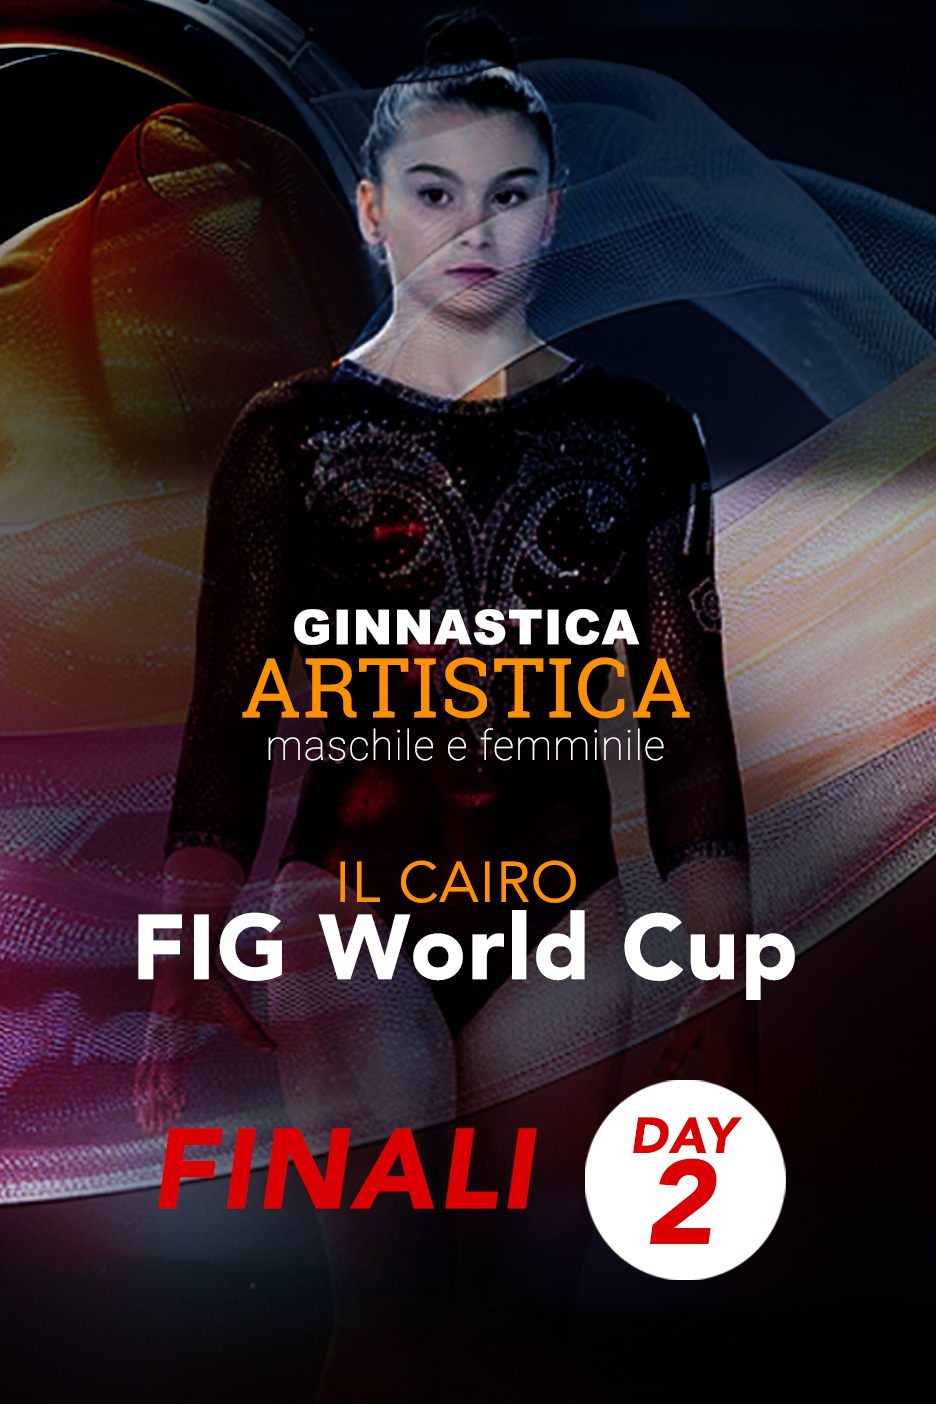 FIG World Cup - Finali Day 2